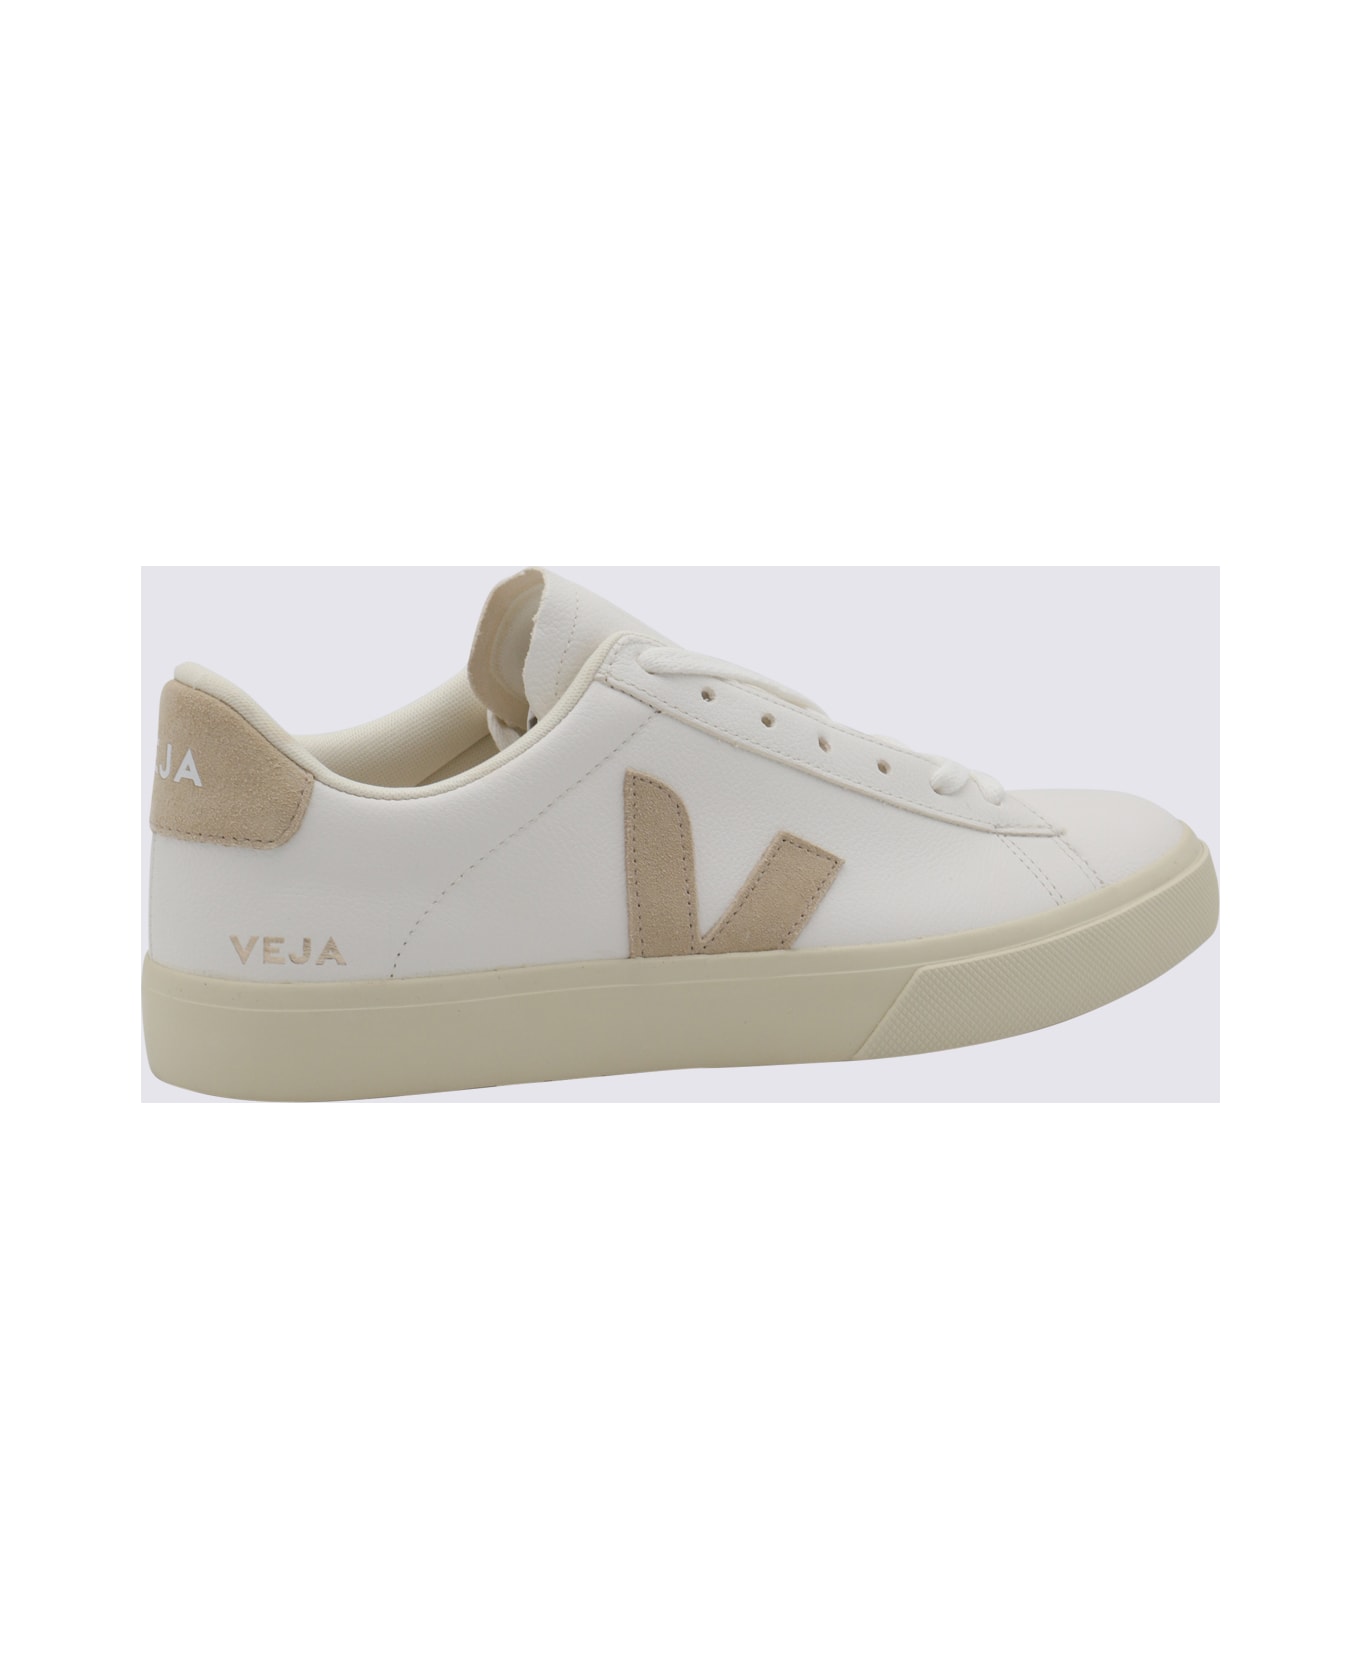 Veja White And Beige Leather Campo Sneakers - EXTRA-WHITE_ALMOND スニーカー